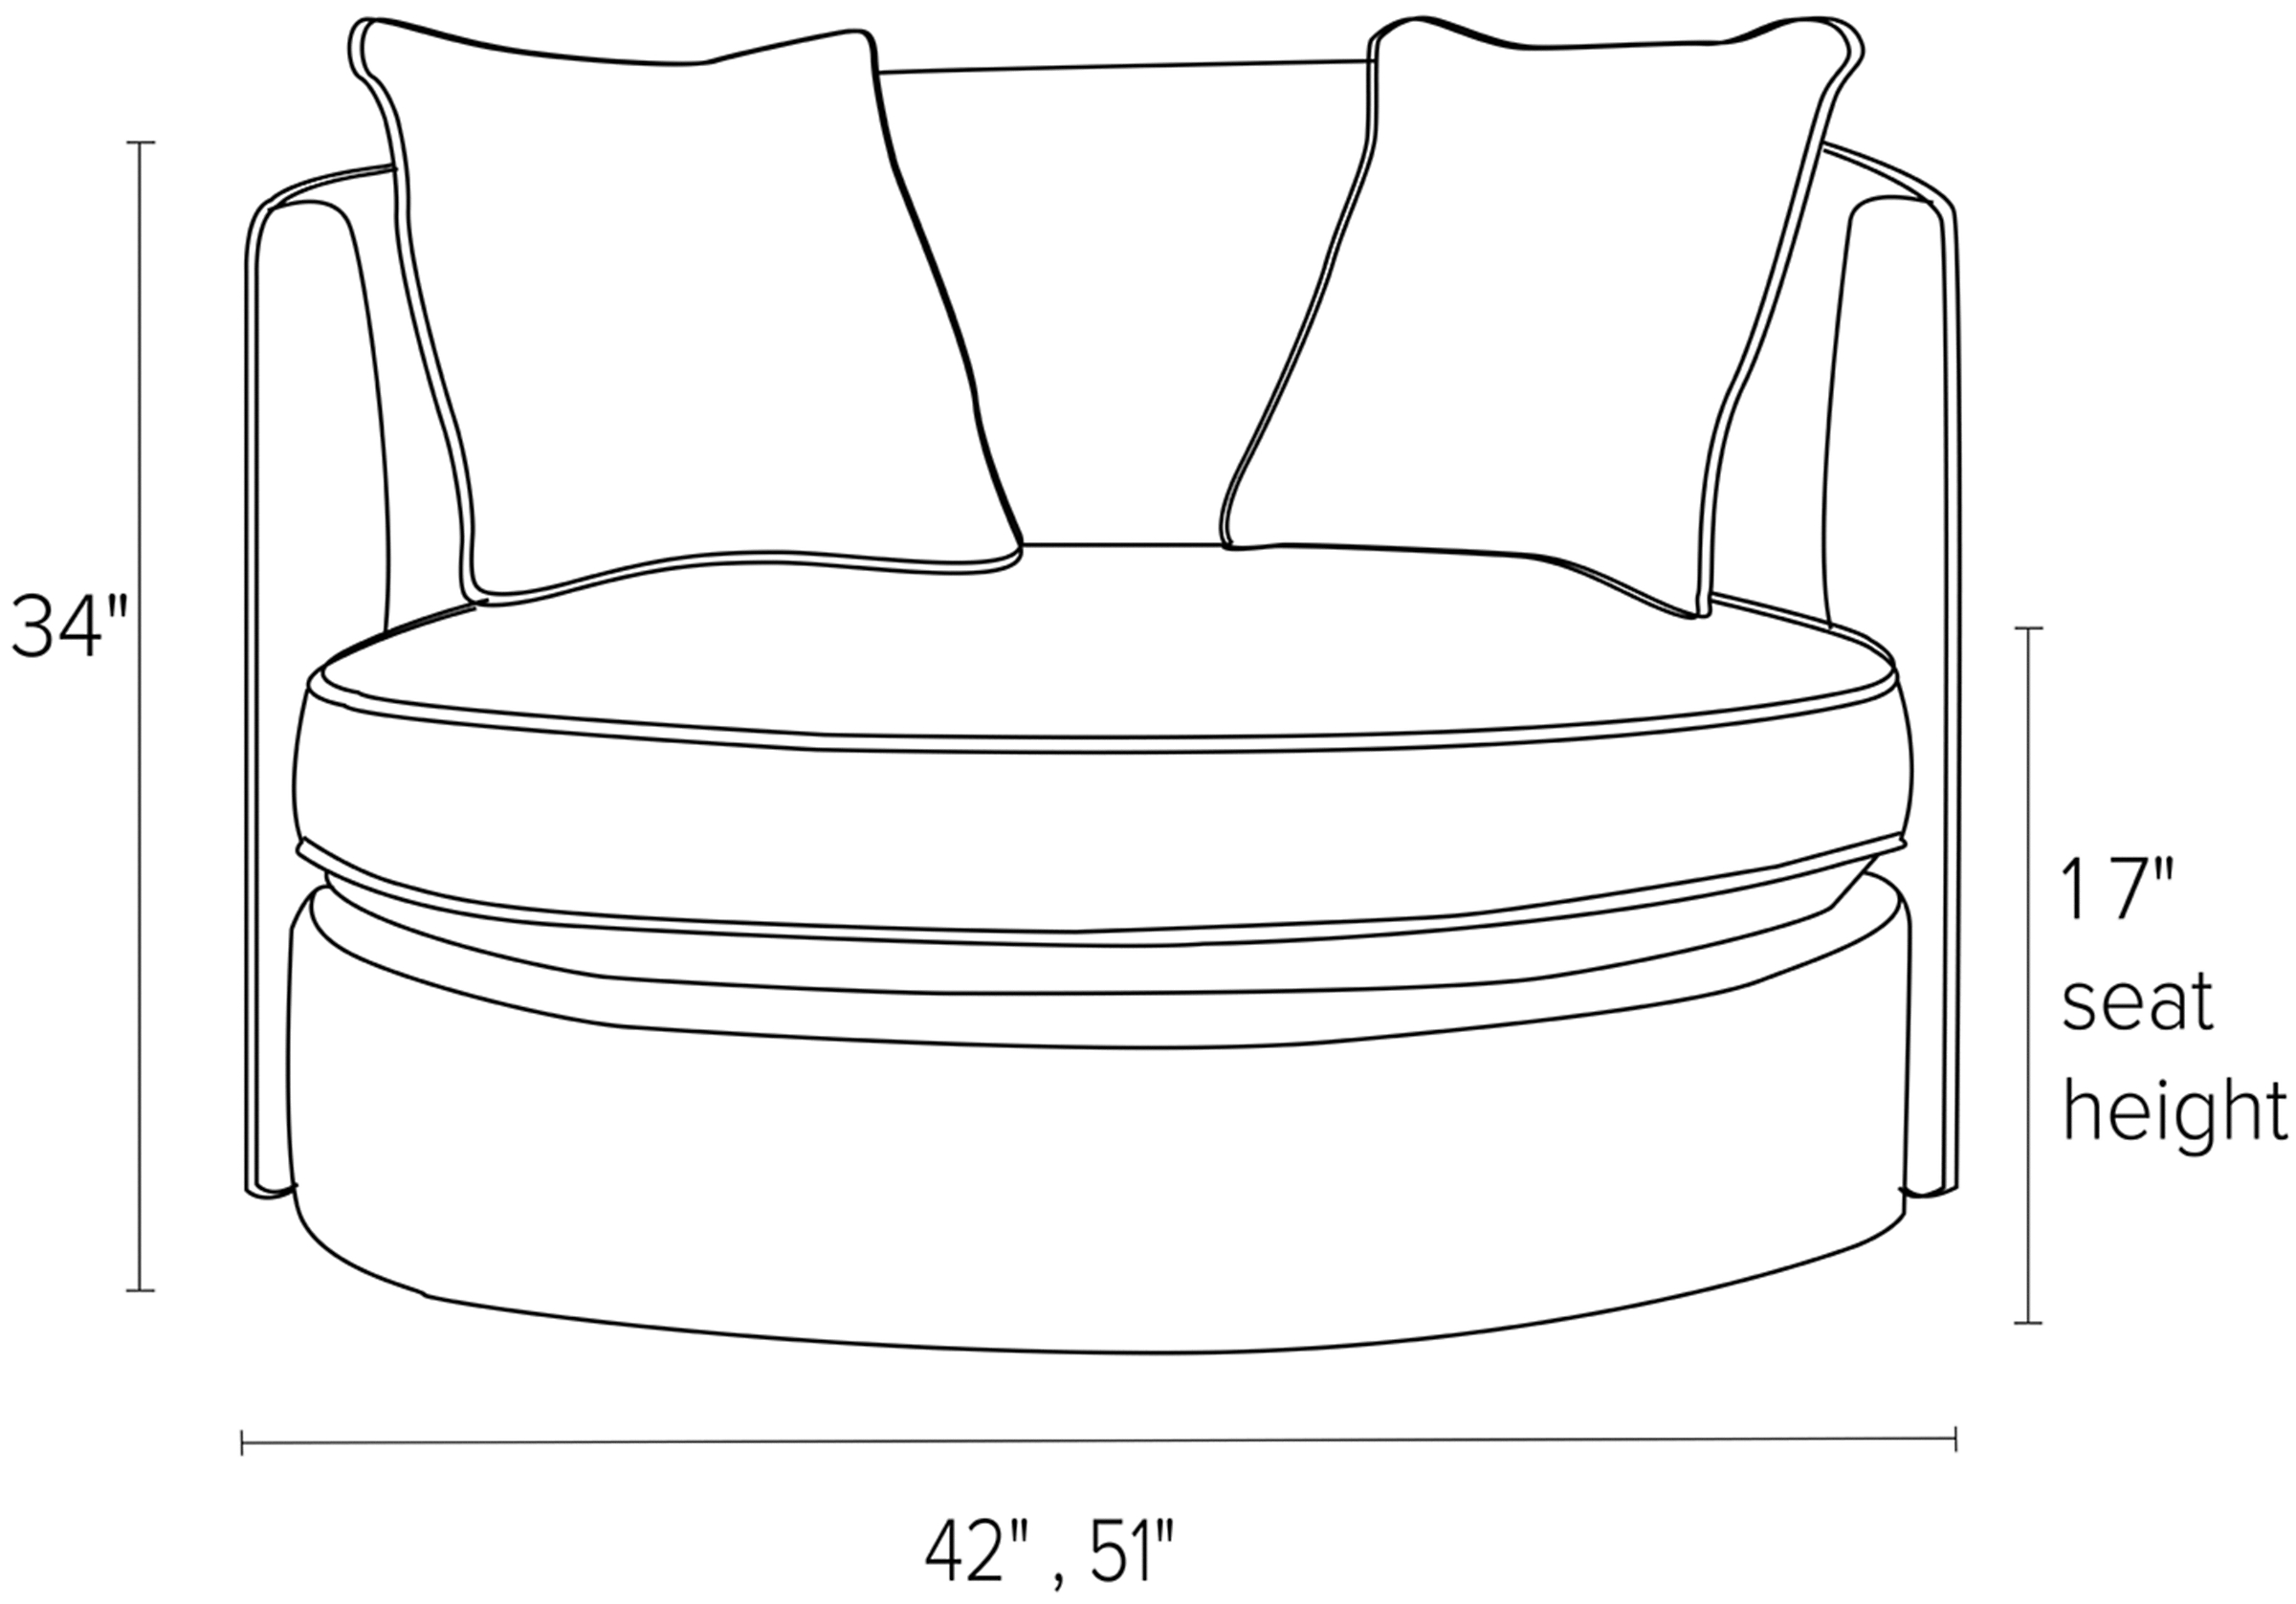 Front view dimension illustration of Eos swivel chair.